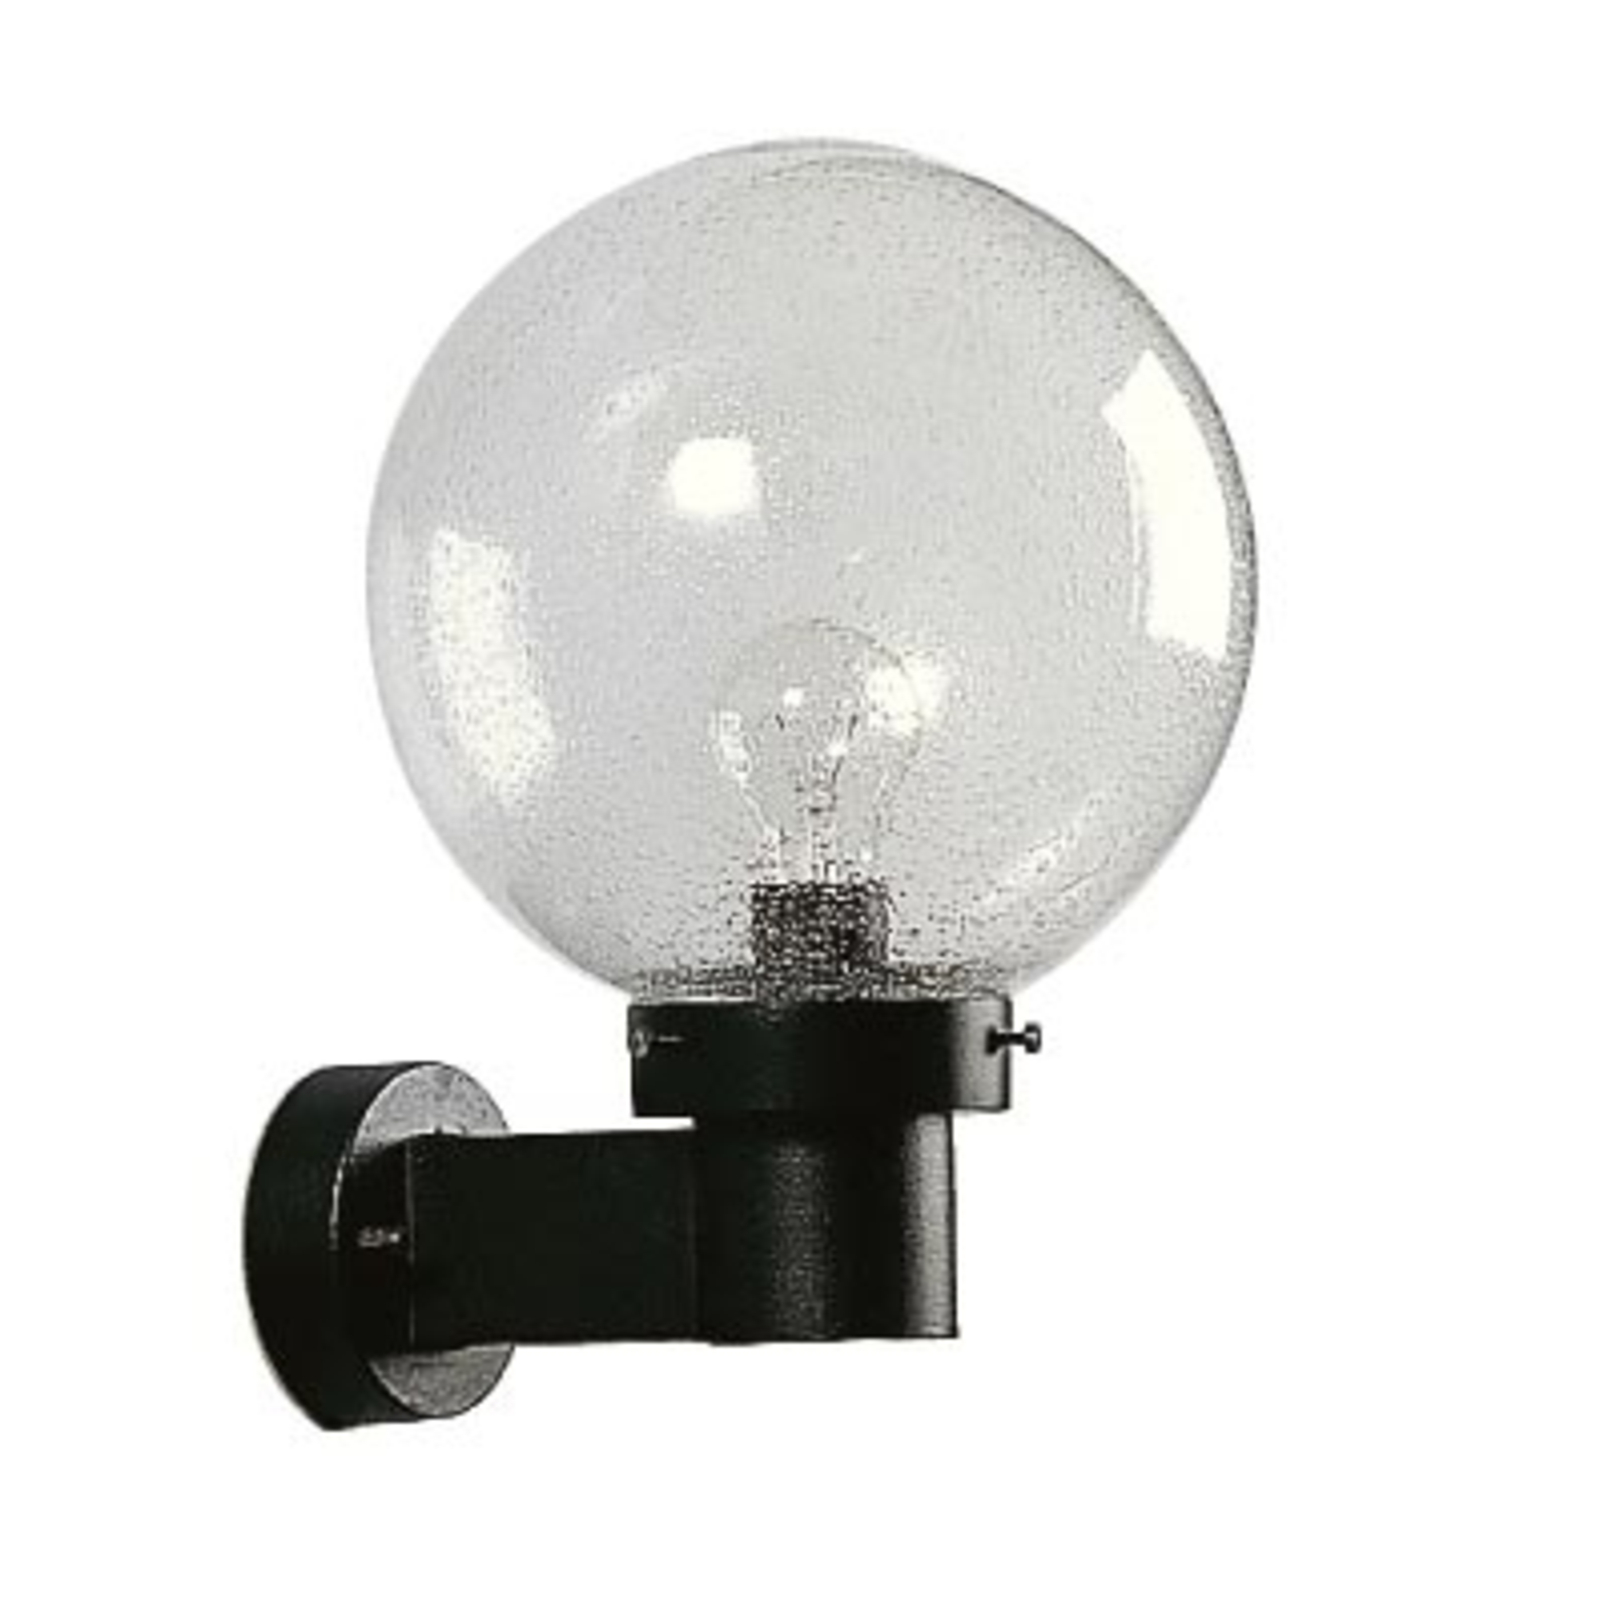 Spherical wall light for outdoor areas, black